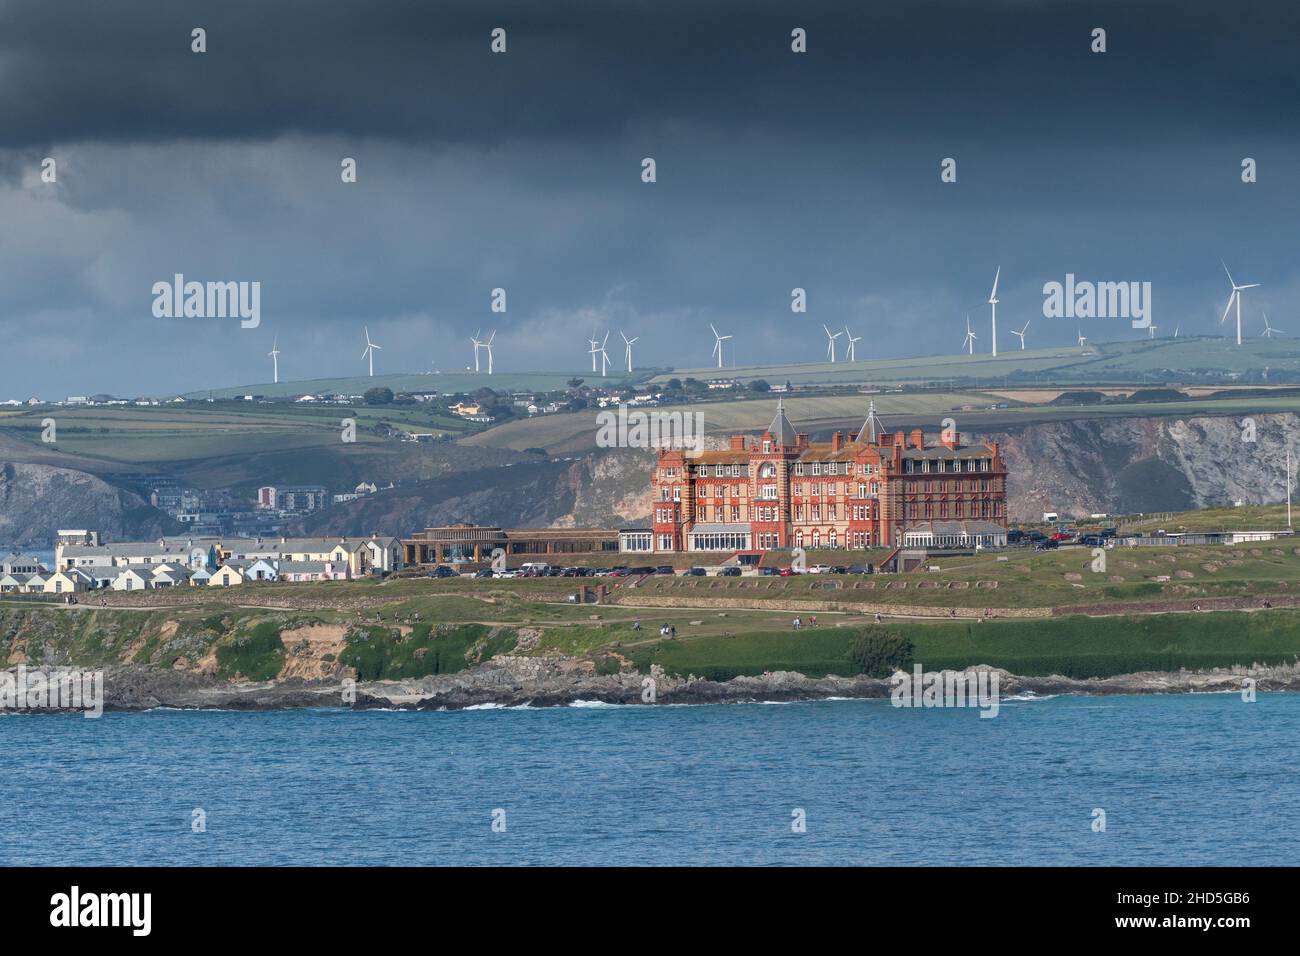 A view of the iconic Headland Hotel seen from Pentire Point East across Fistral Bay in Newquay in Cornwall. Stock Photo